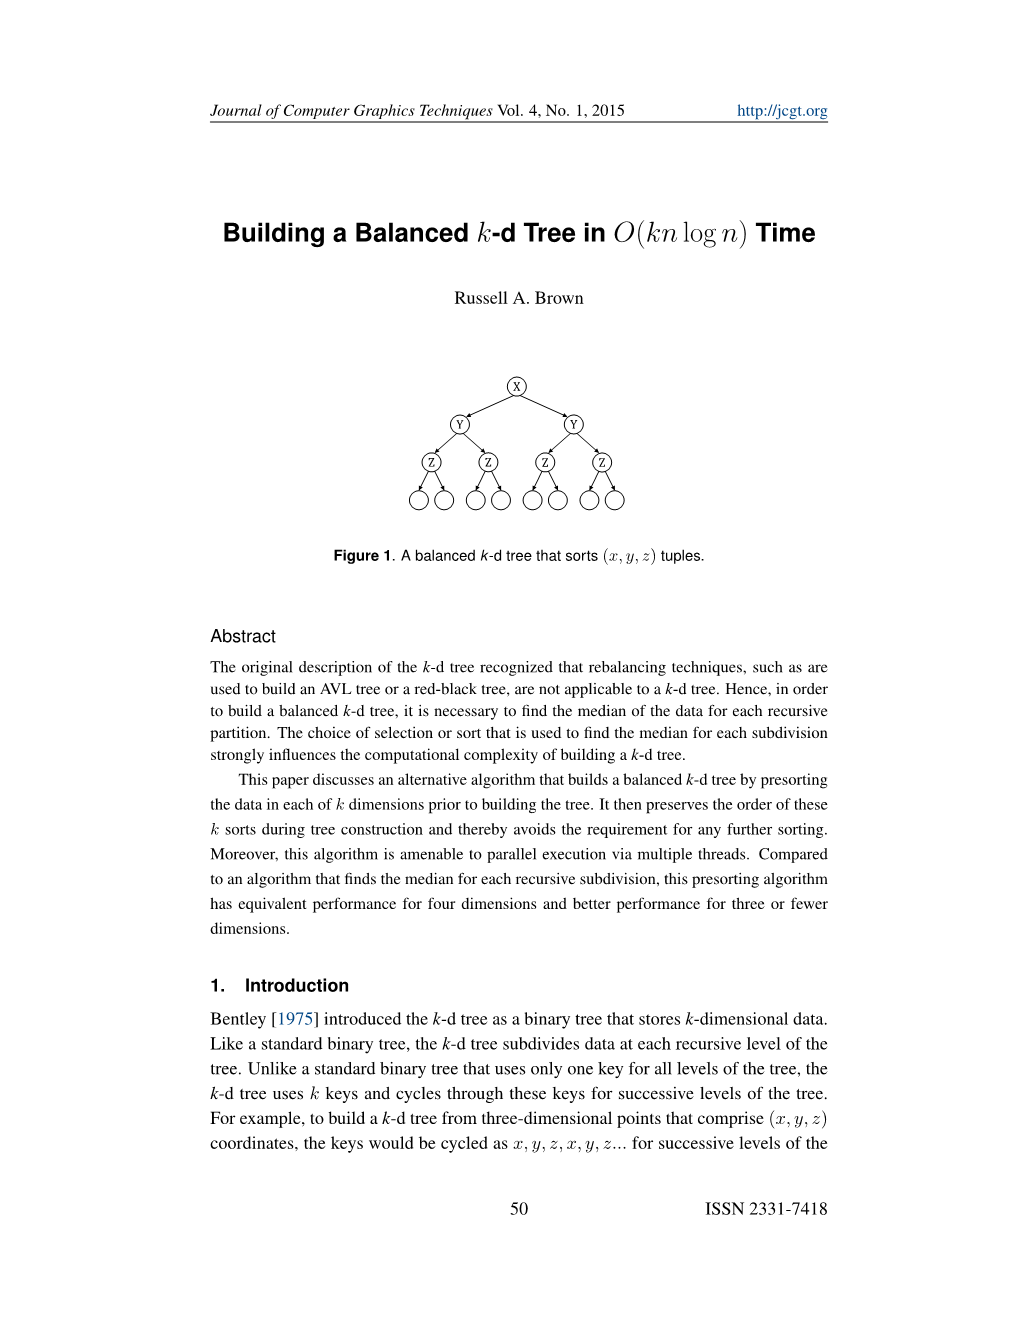 Building a Balanced K-D Tree in O(Knlog N) Time